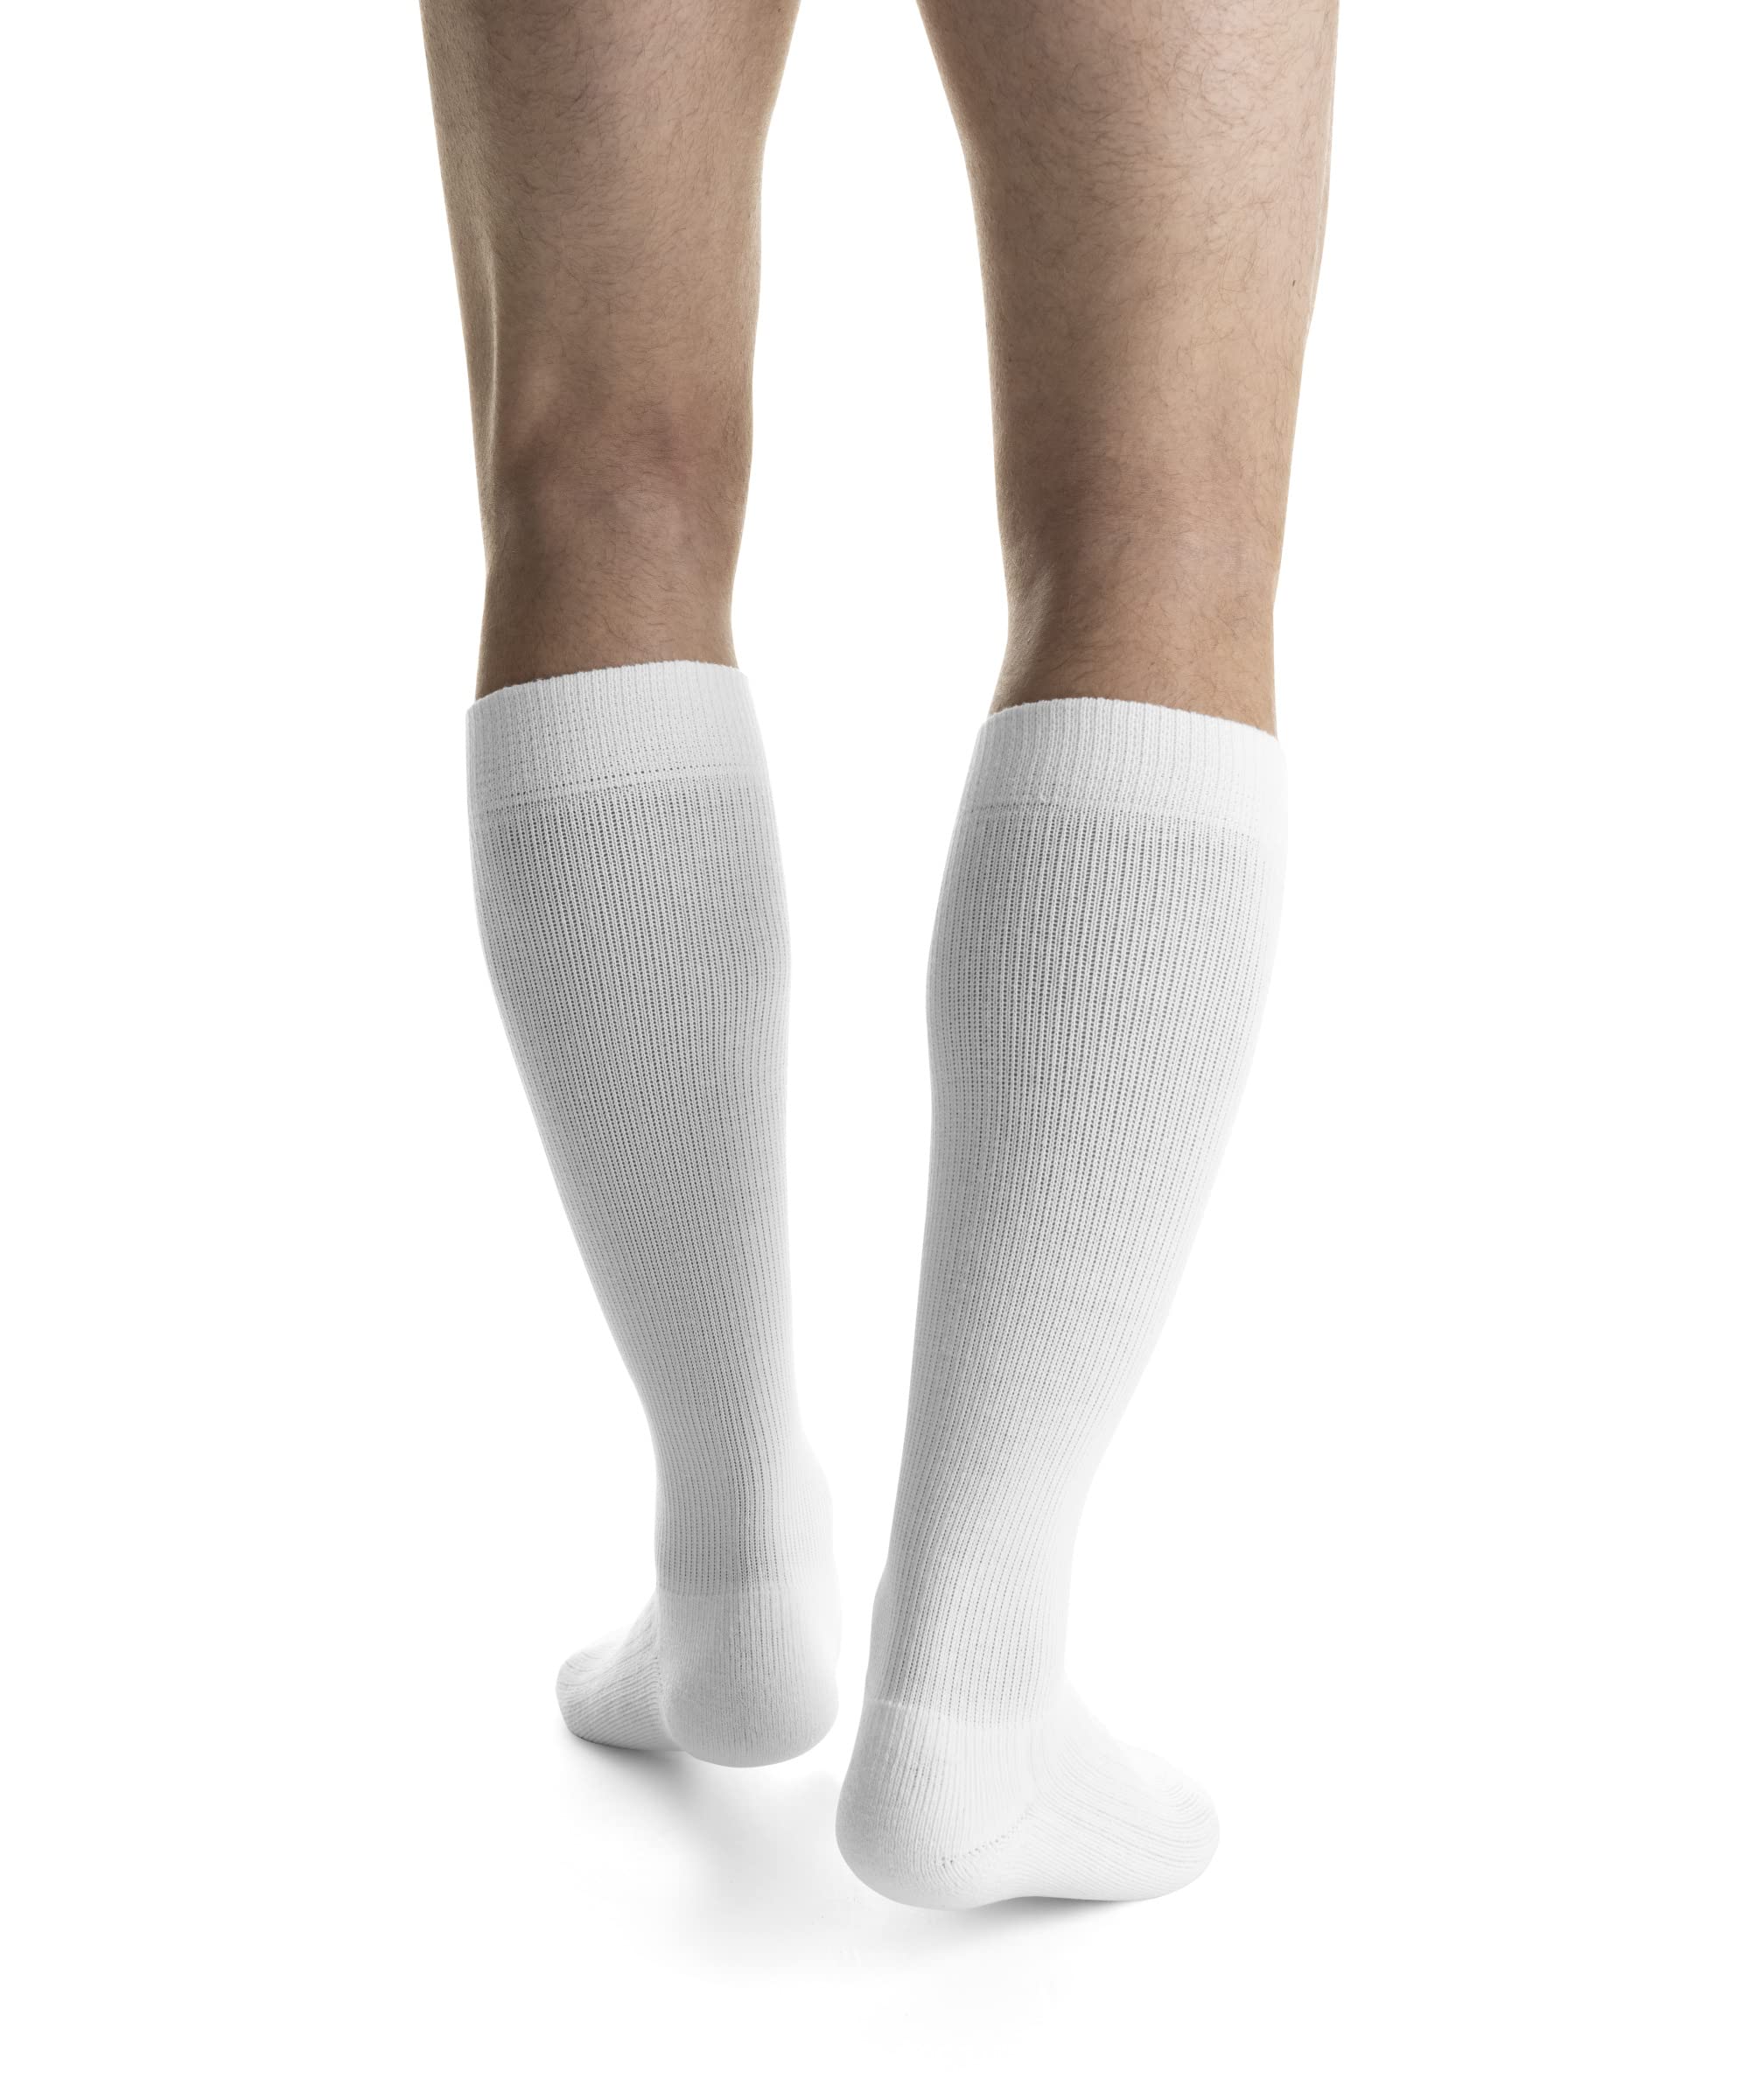 JOBST Activewear 20-30 mmHg Knee High Compression Socks, X-Large Full Calf, Cool White